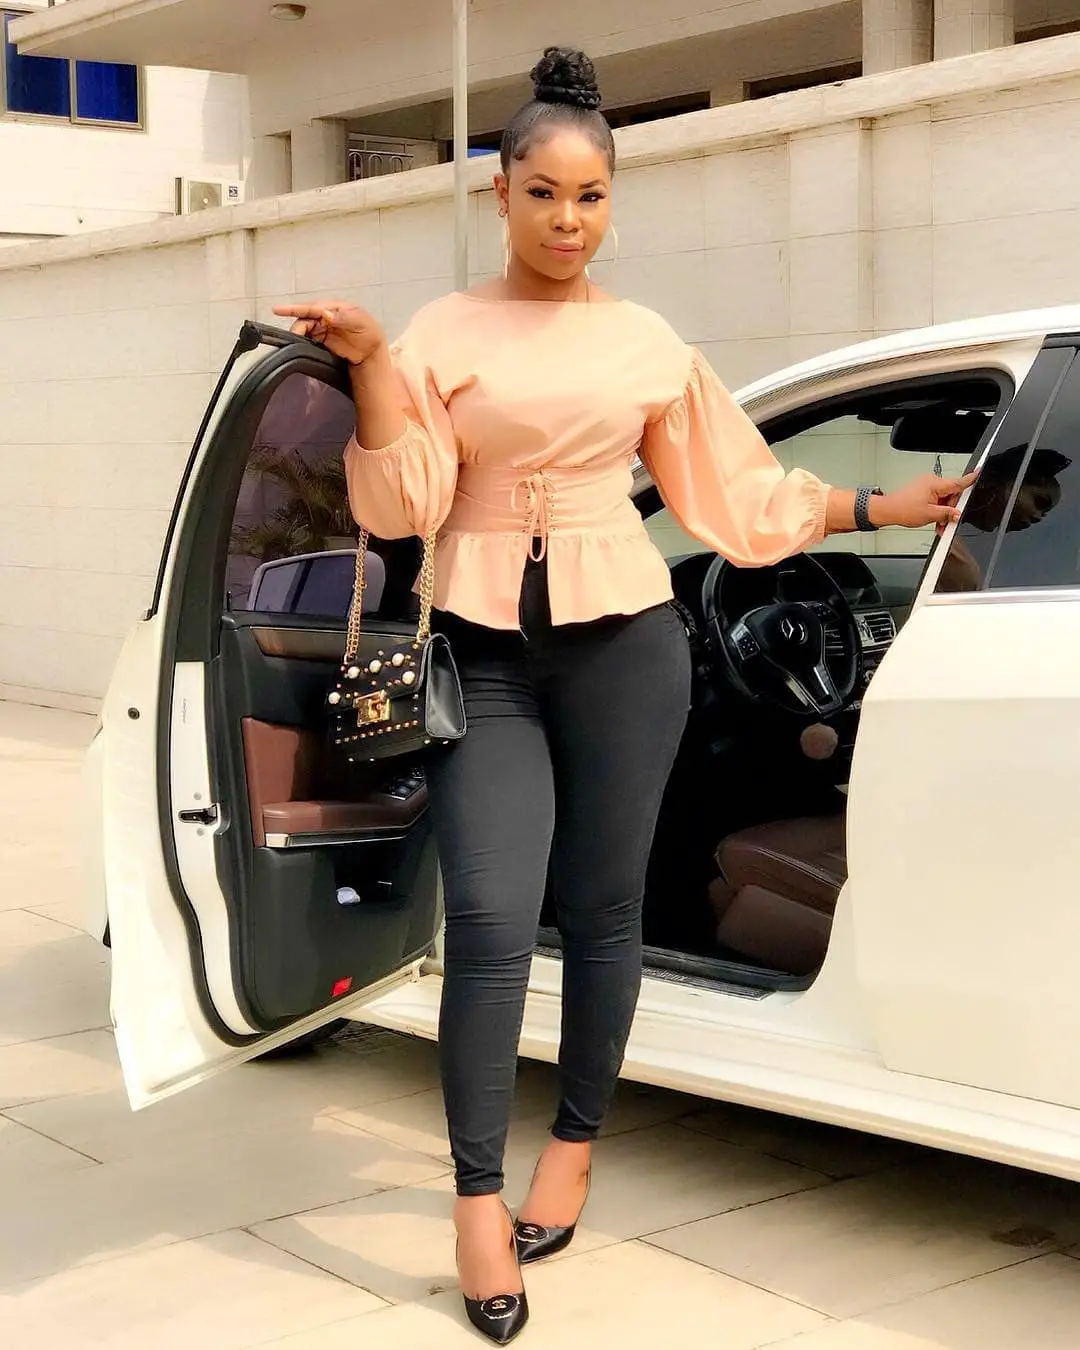 Fabulous and Attractive, 10 Office Wears To Inspire Your Work Attires This Week